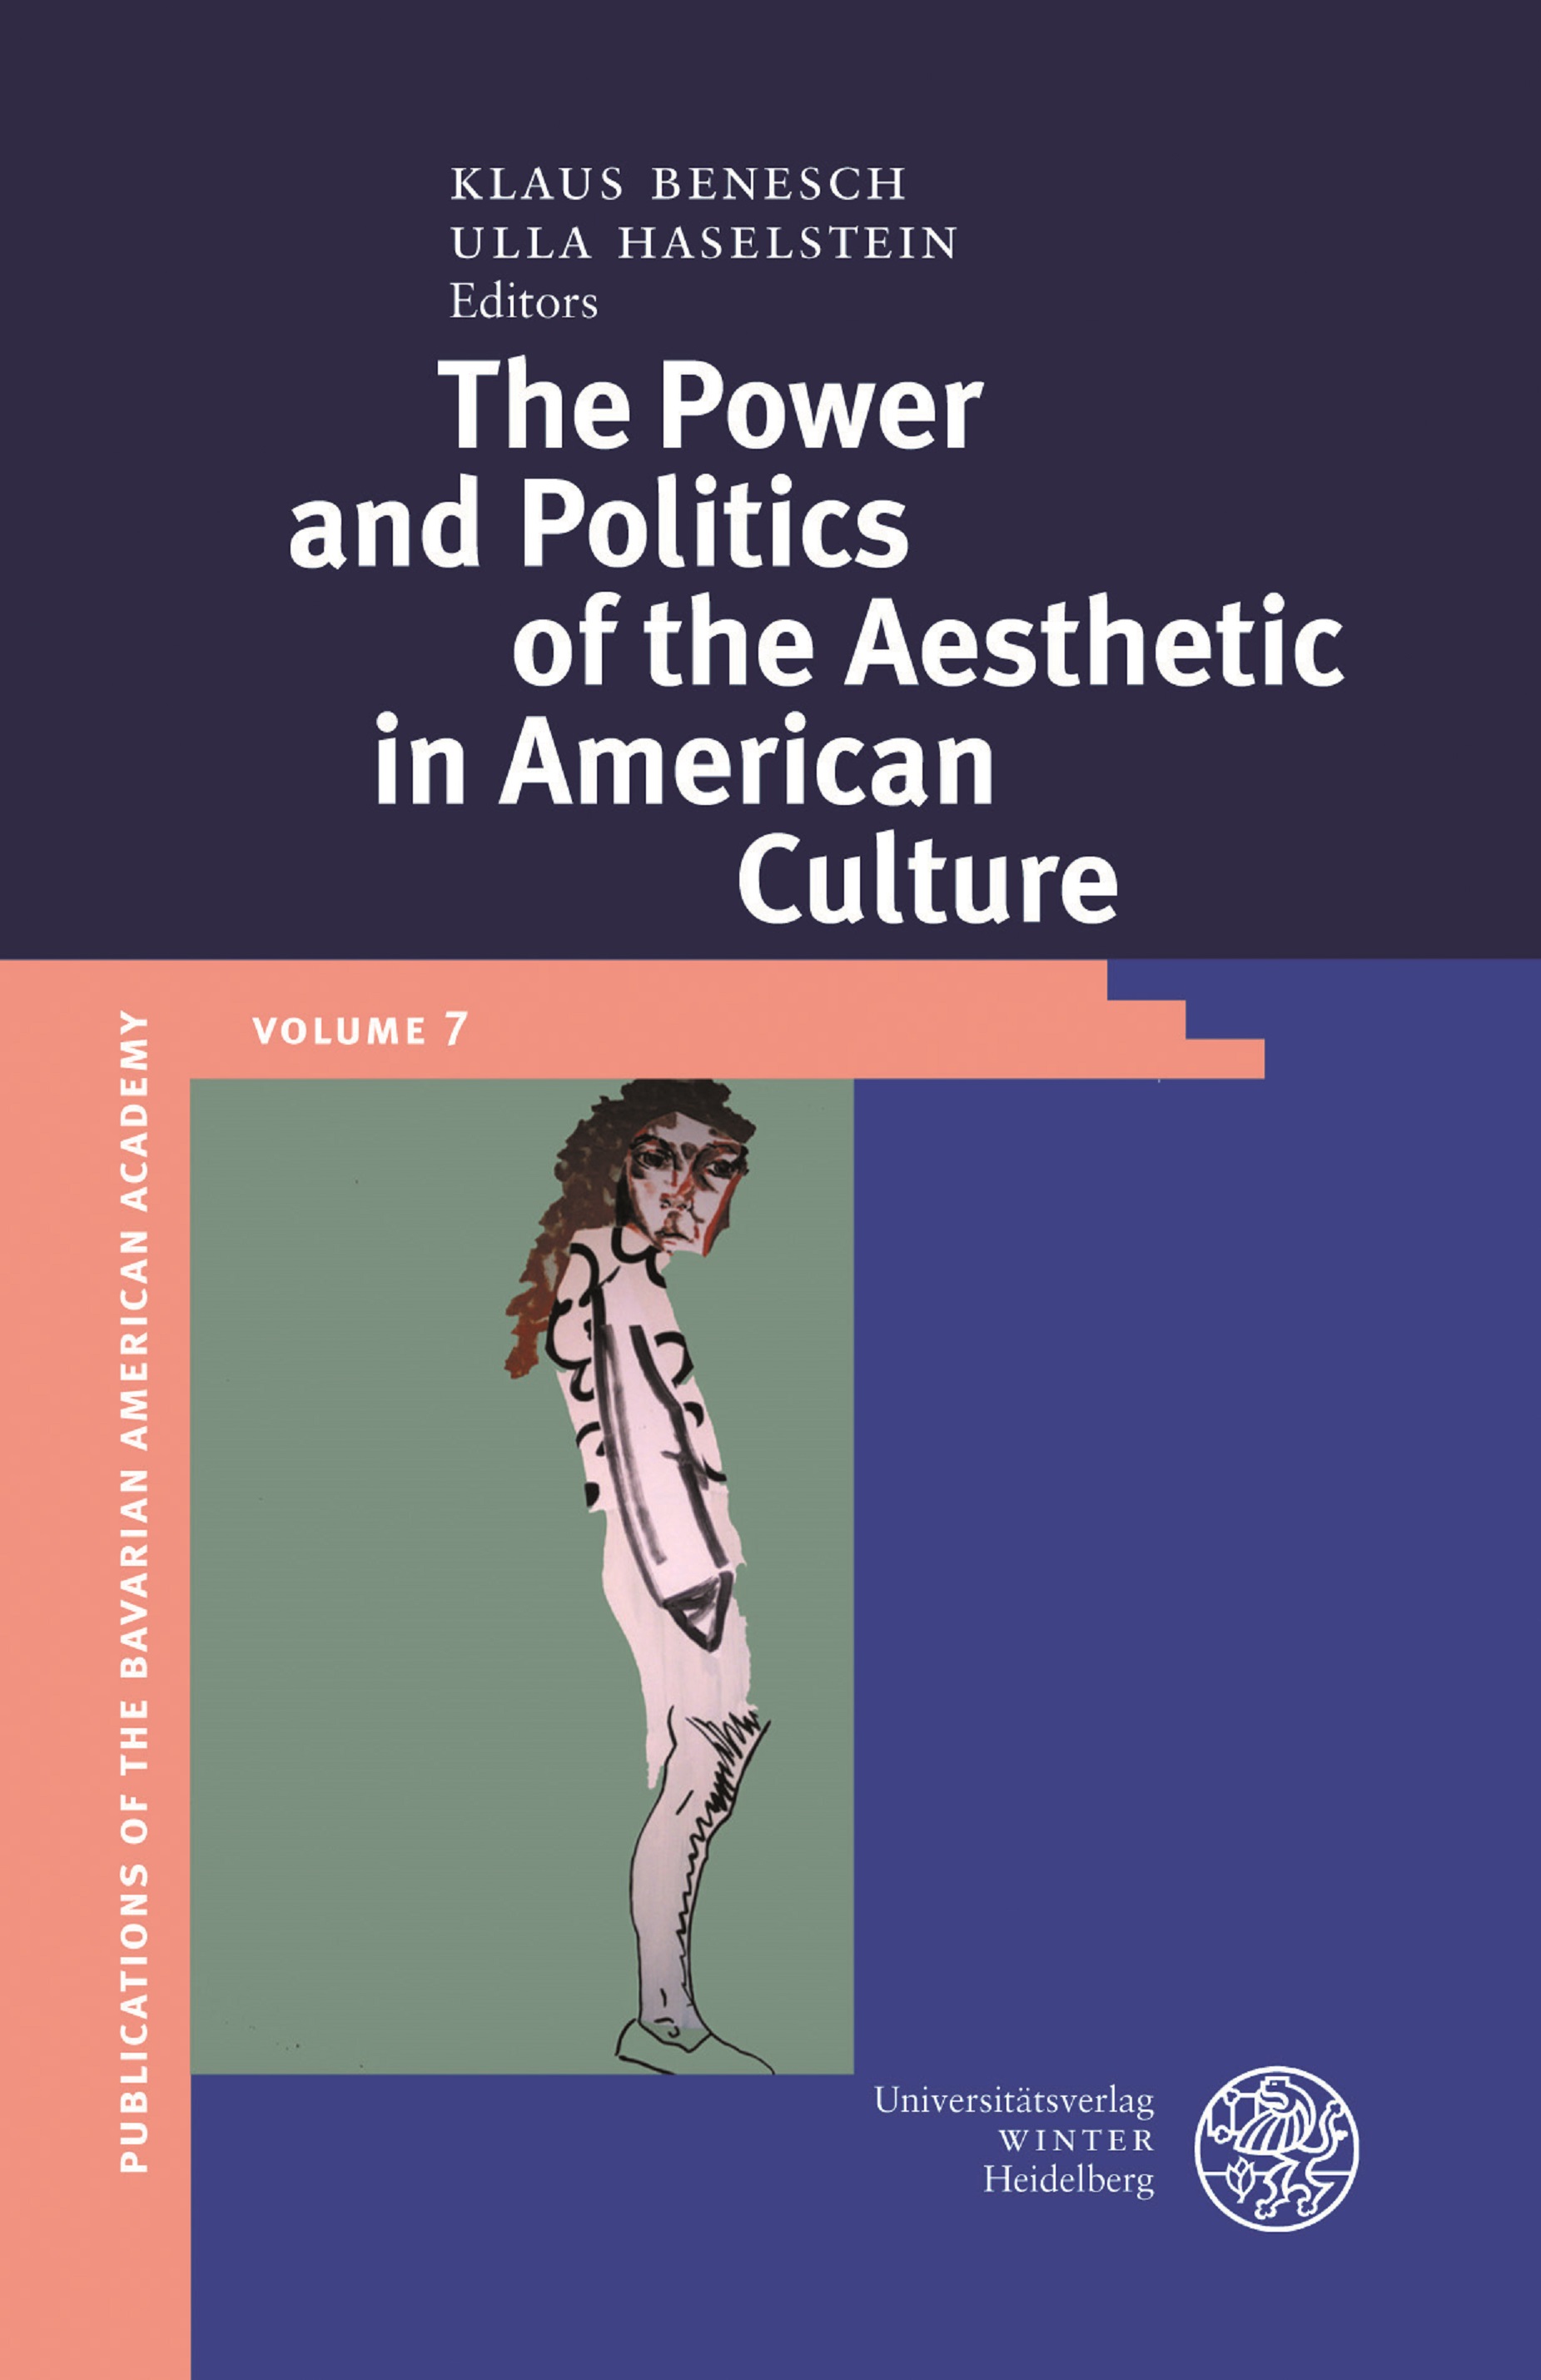 BAA publication Vol. 7 The Power and Politics of the Aesthetic in American Culture